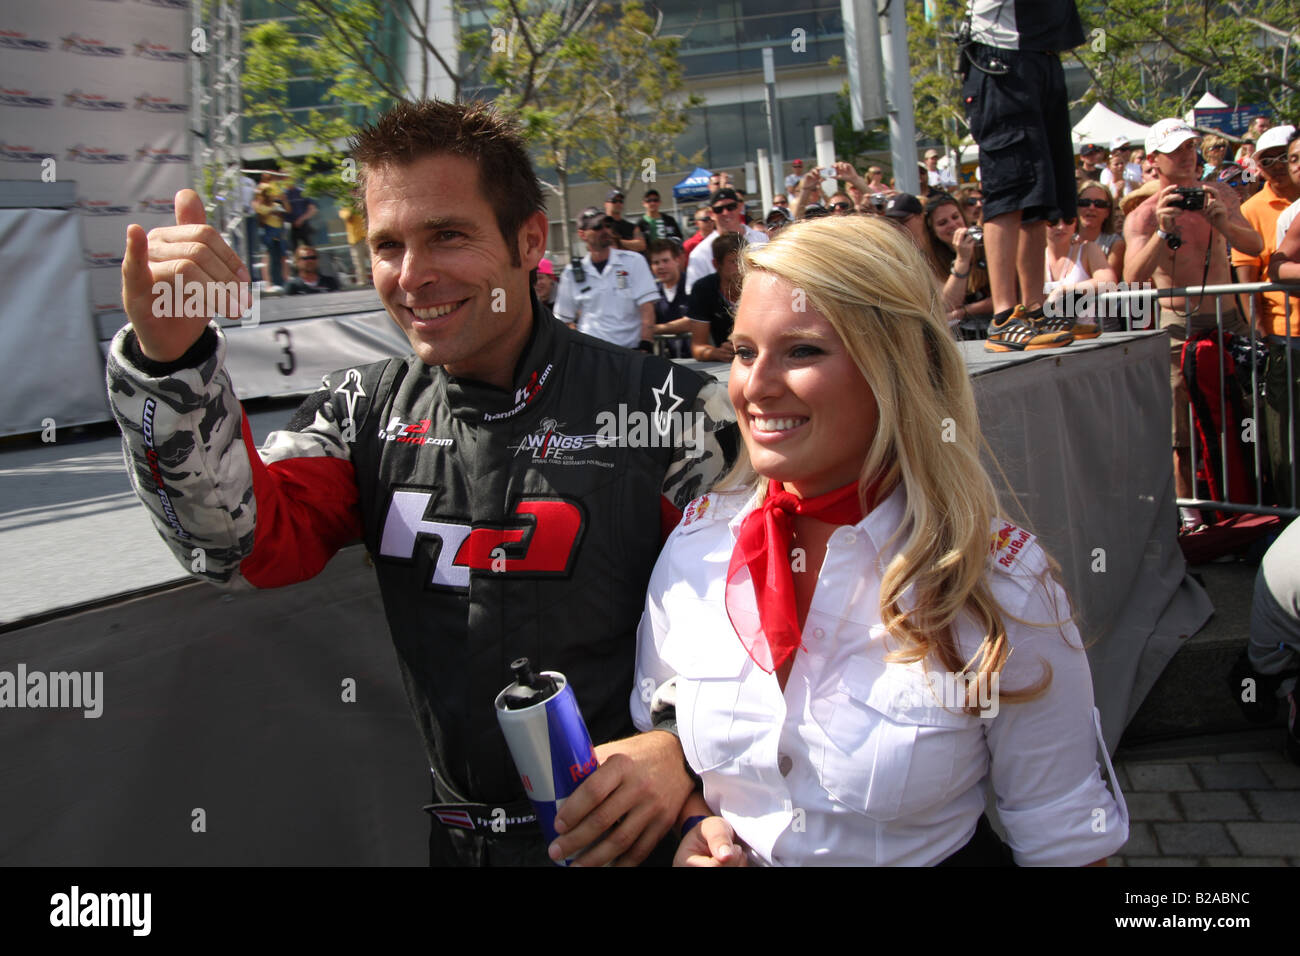 Hannes Arch walks with Red Bull Flight Girl to the awards ceremony for the Red Bull Air Race World Series in Detroit, MI. Stock Photo